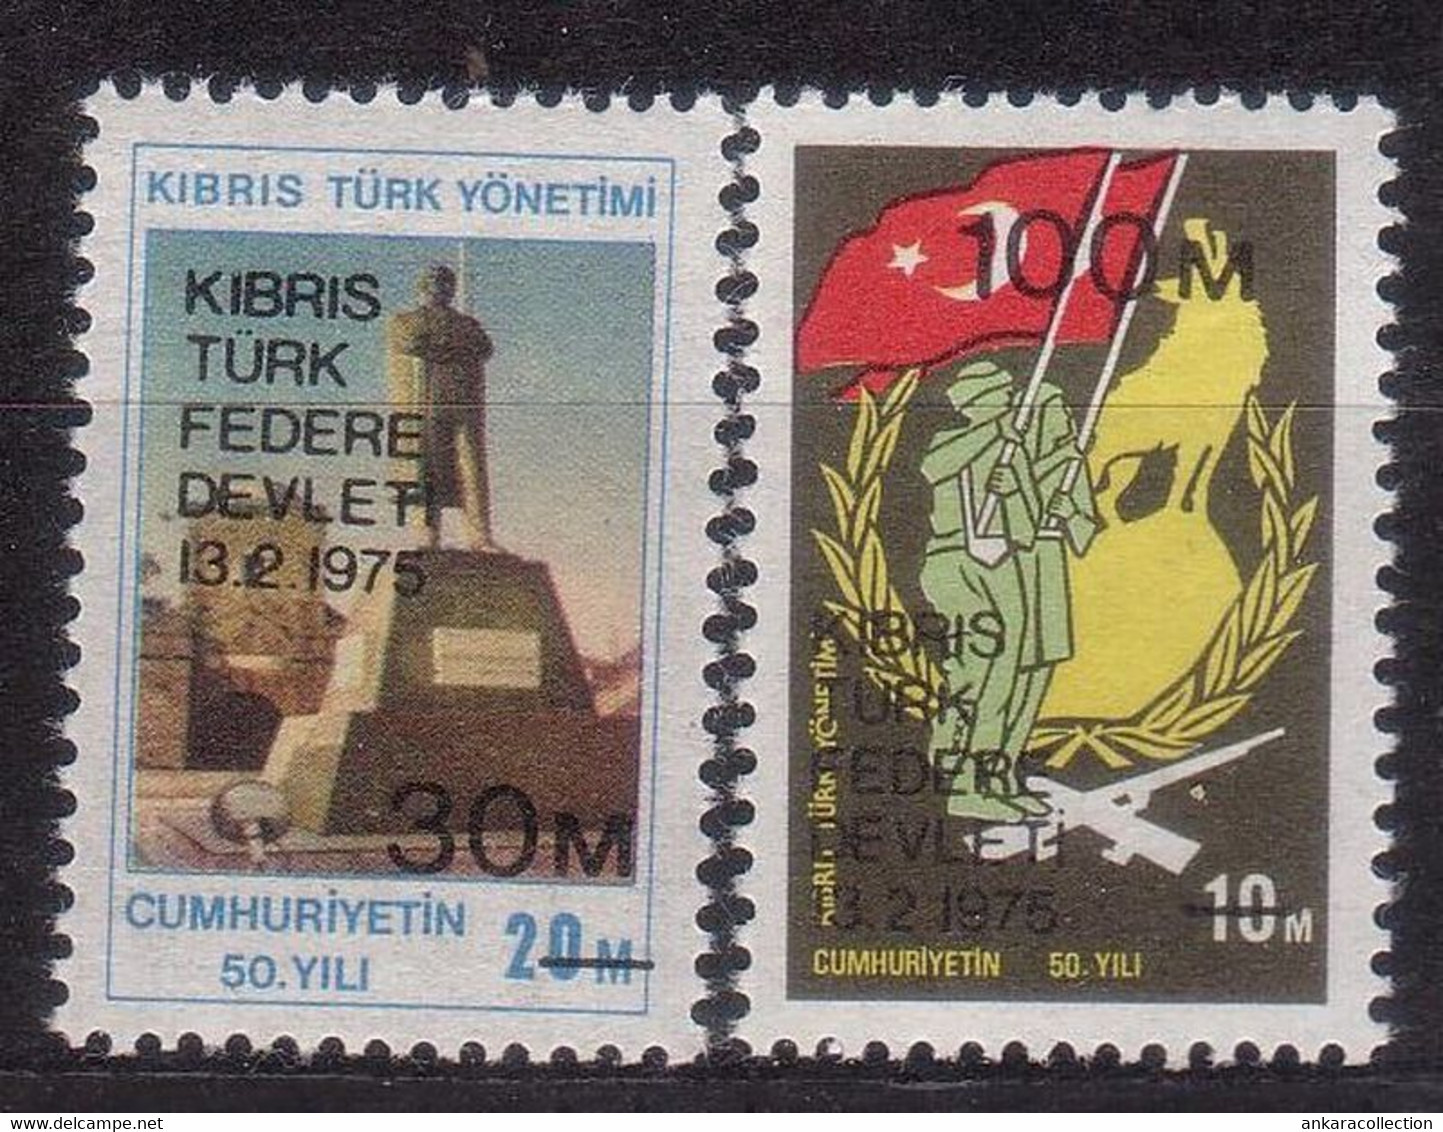 AC - NORTHERN CYPRUS STAMP - FOUNDATION OF FEDERAL STATE OF TURKISH CYPRUS MNH 03 MARCH 1975 - Unused Stamps